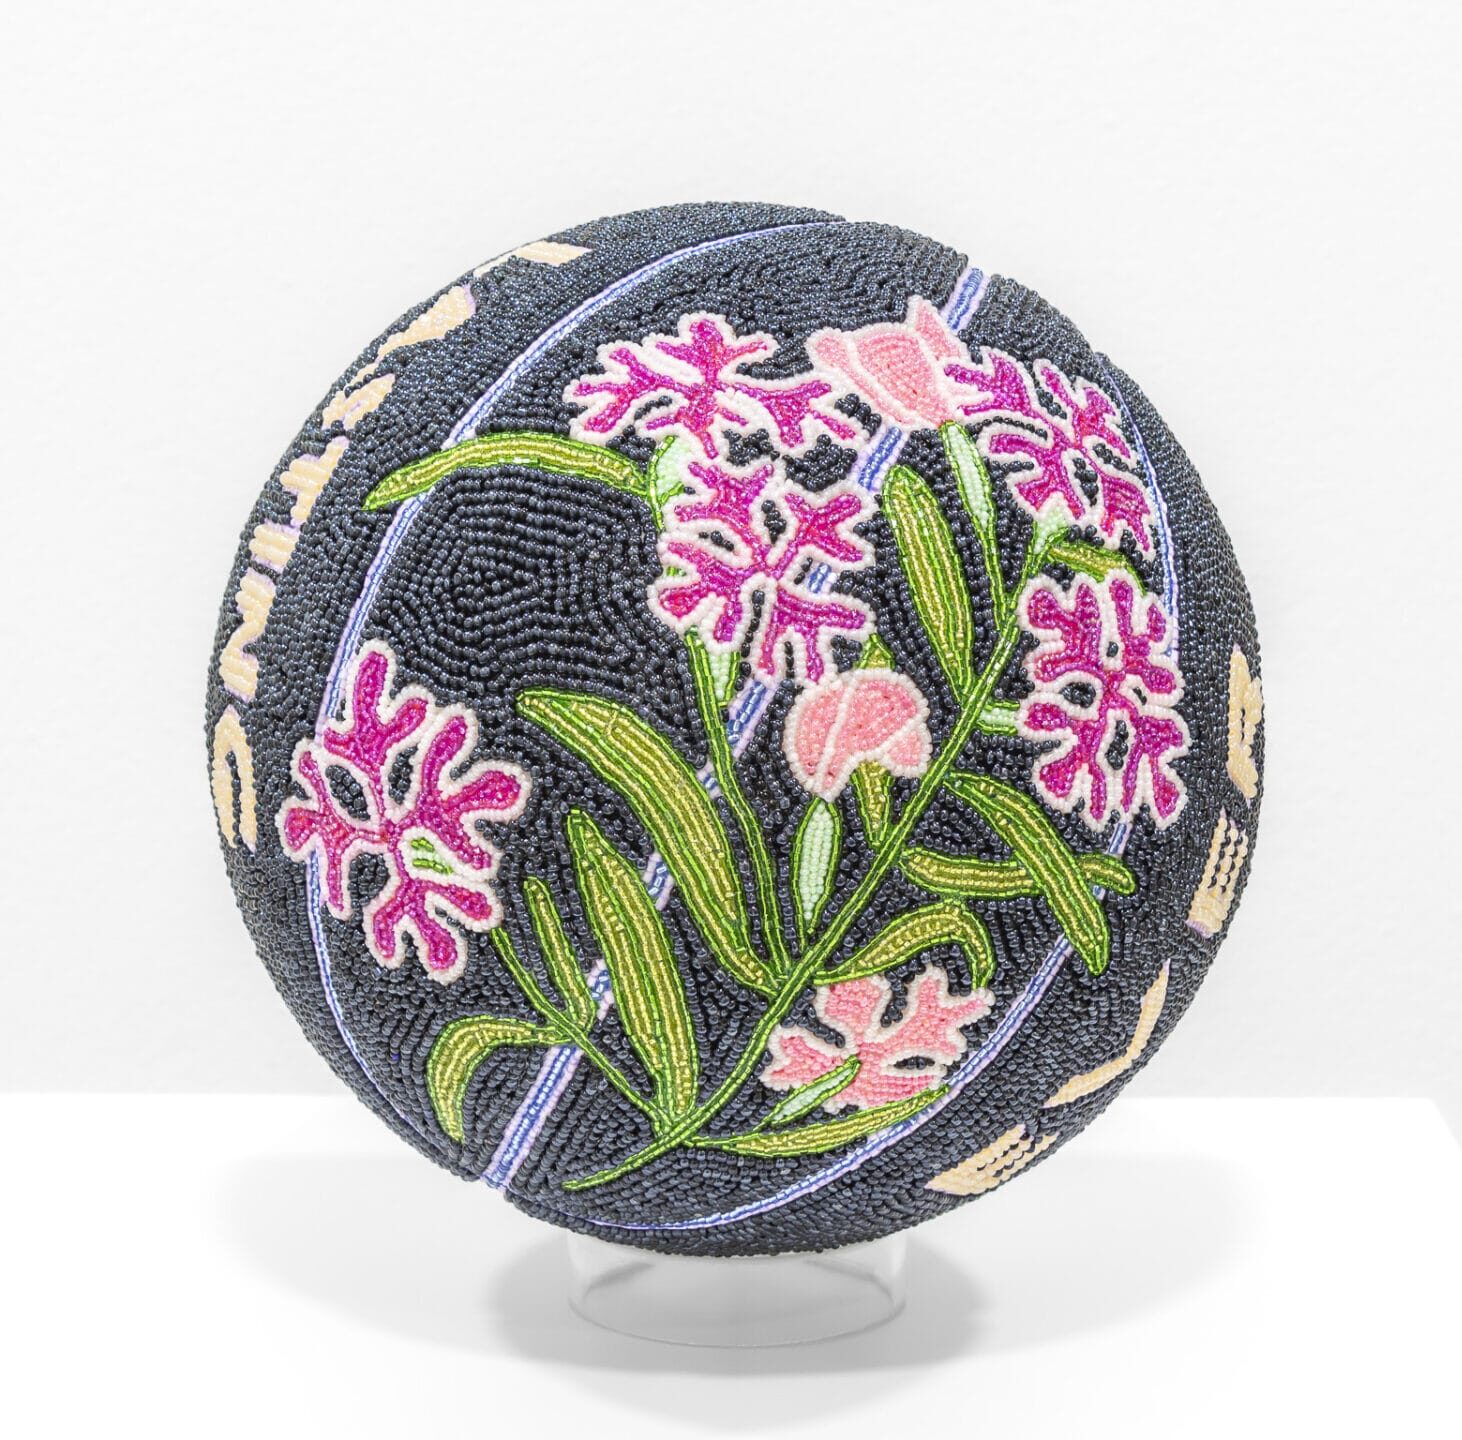 a glass bead-coated spherical sculpture made from a basketball depicting magenta flowers and green leaves on a black background